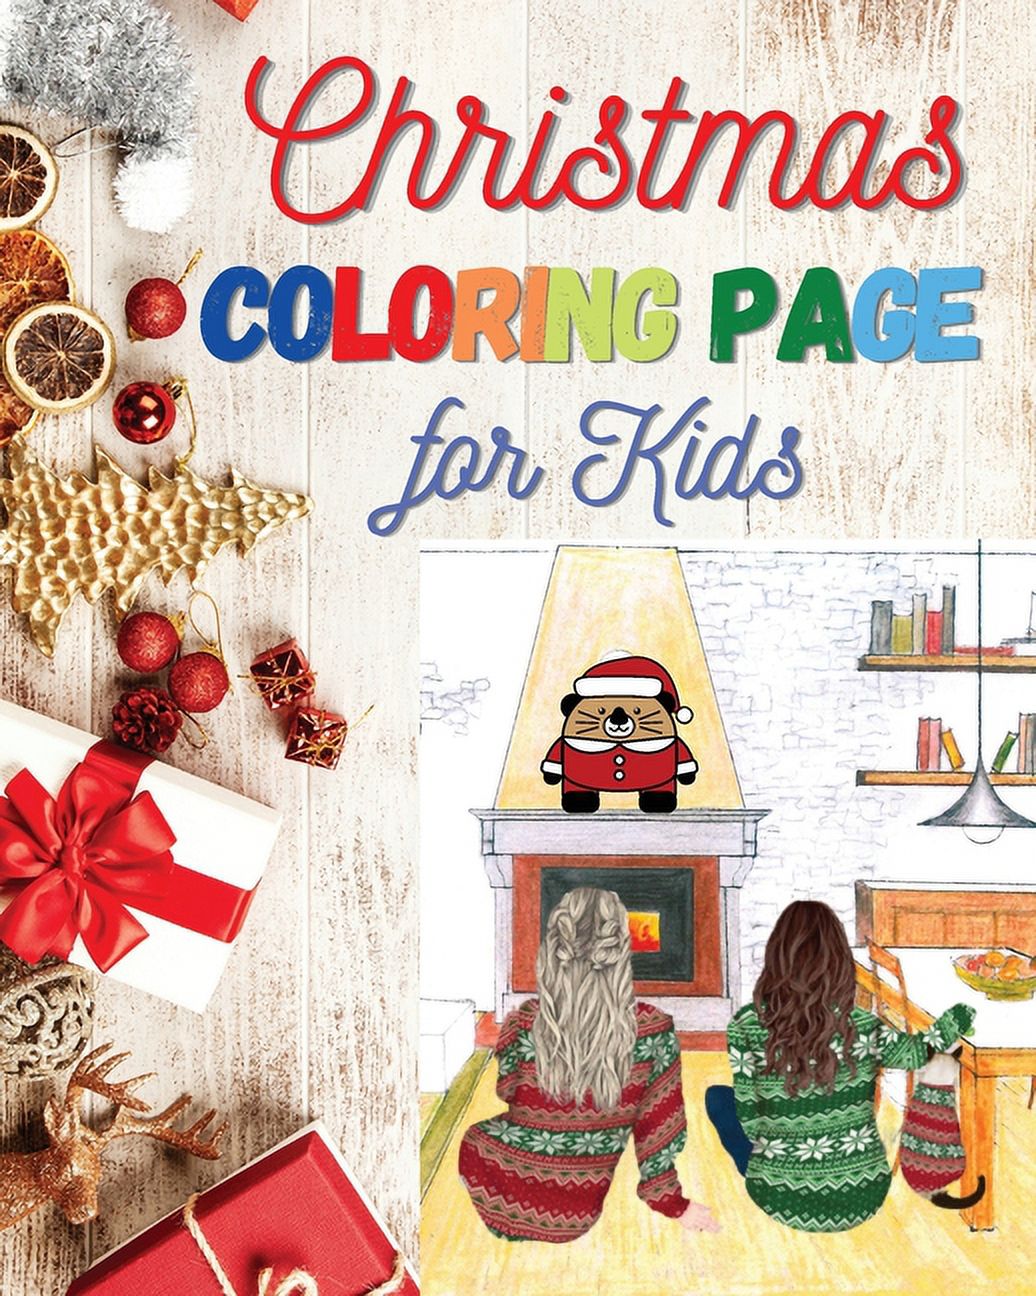 Christmas Coloring Page For Kids: Christmas is a very special time to live next to your family and loved ones and, for t - image 1 of 1